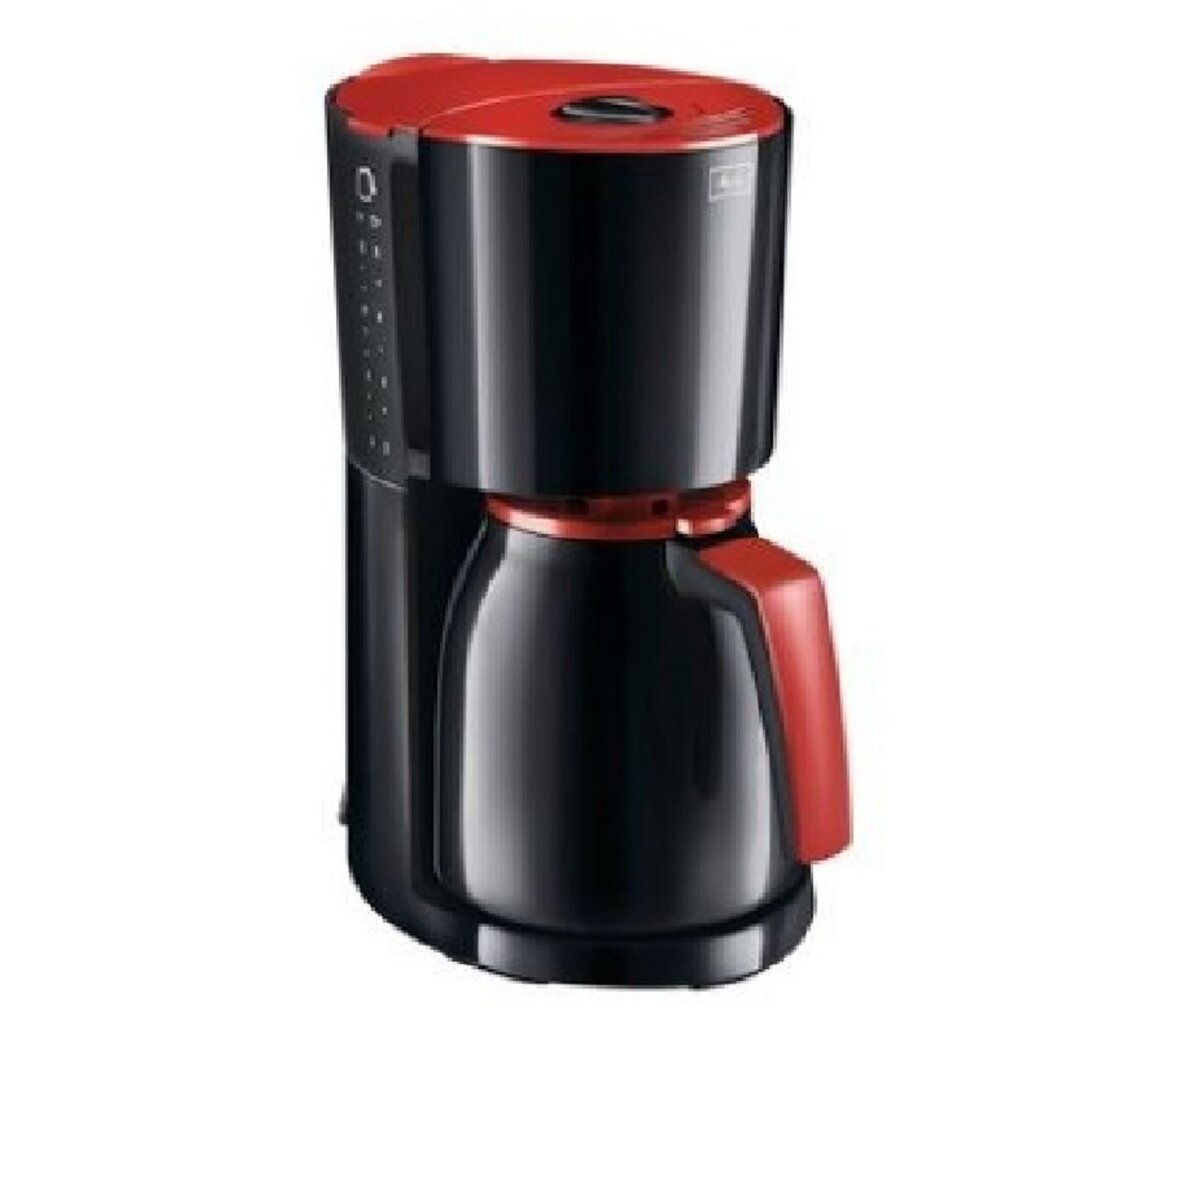 MELITTA Cafetiere isotherme Enjoy II Therm Noir-Rouge 1017-10